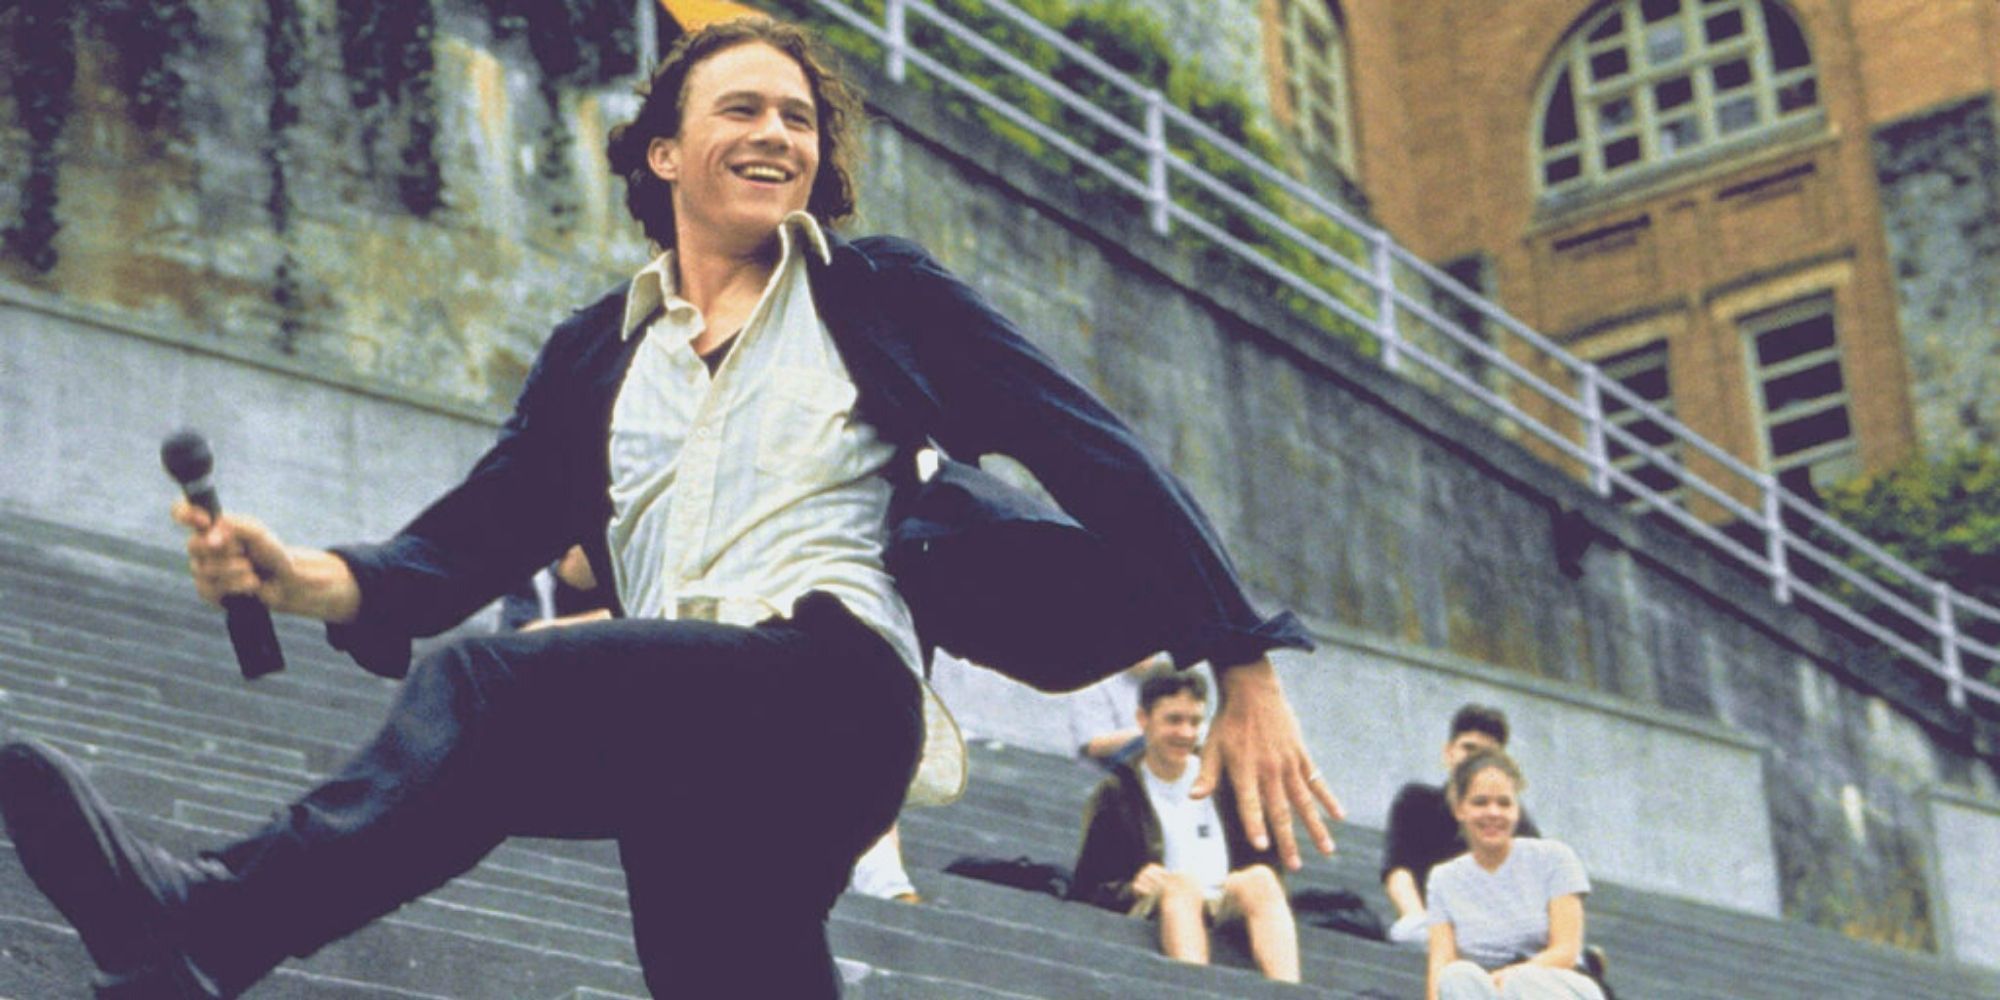 heath ledger 10 things i hate about you